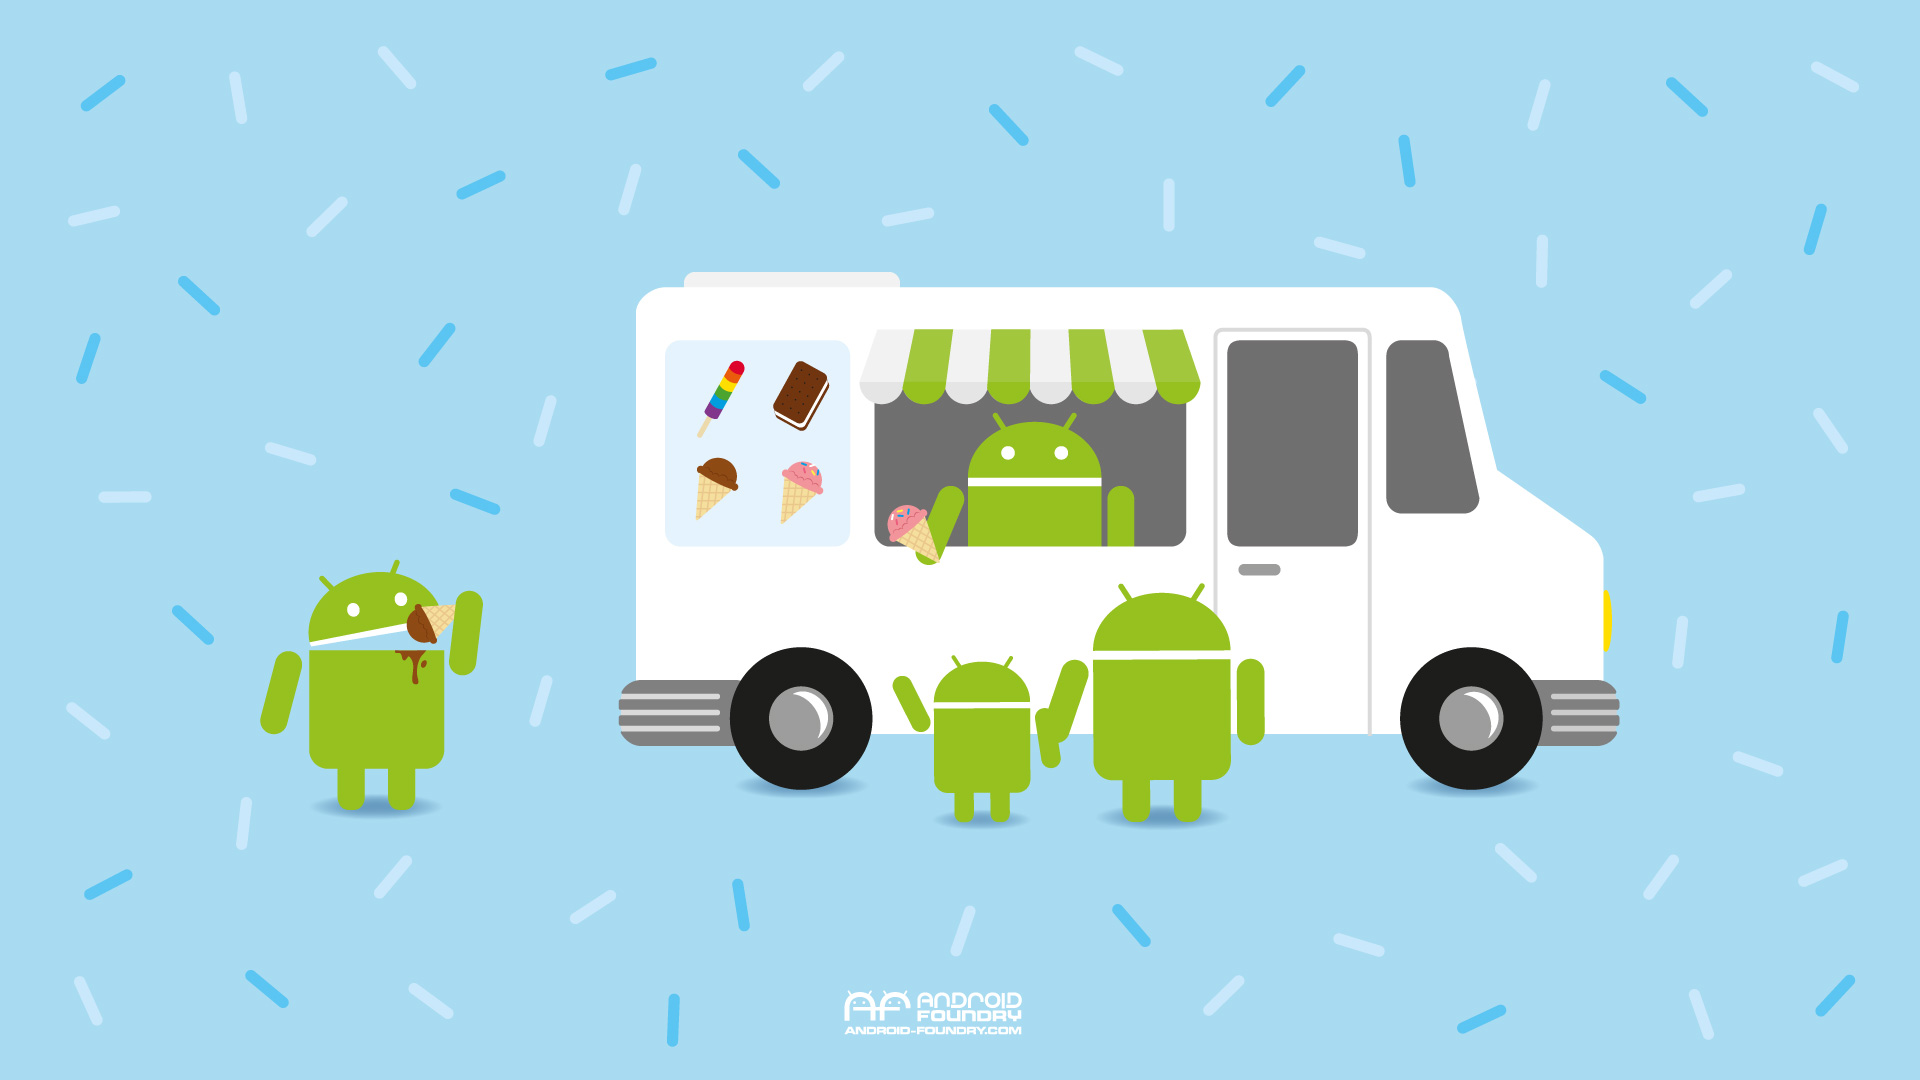 Andrew Bell Releases Android Wallpaper To Celebrate National Ice Cream